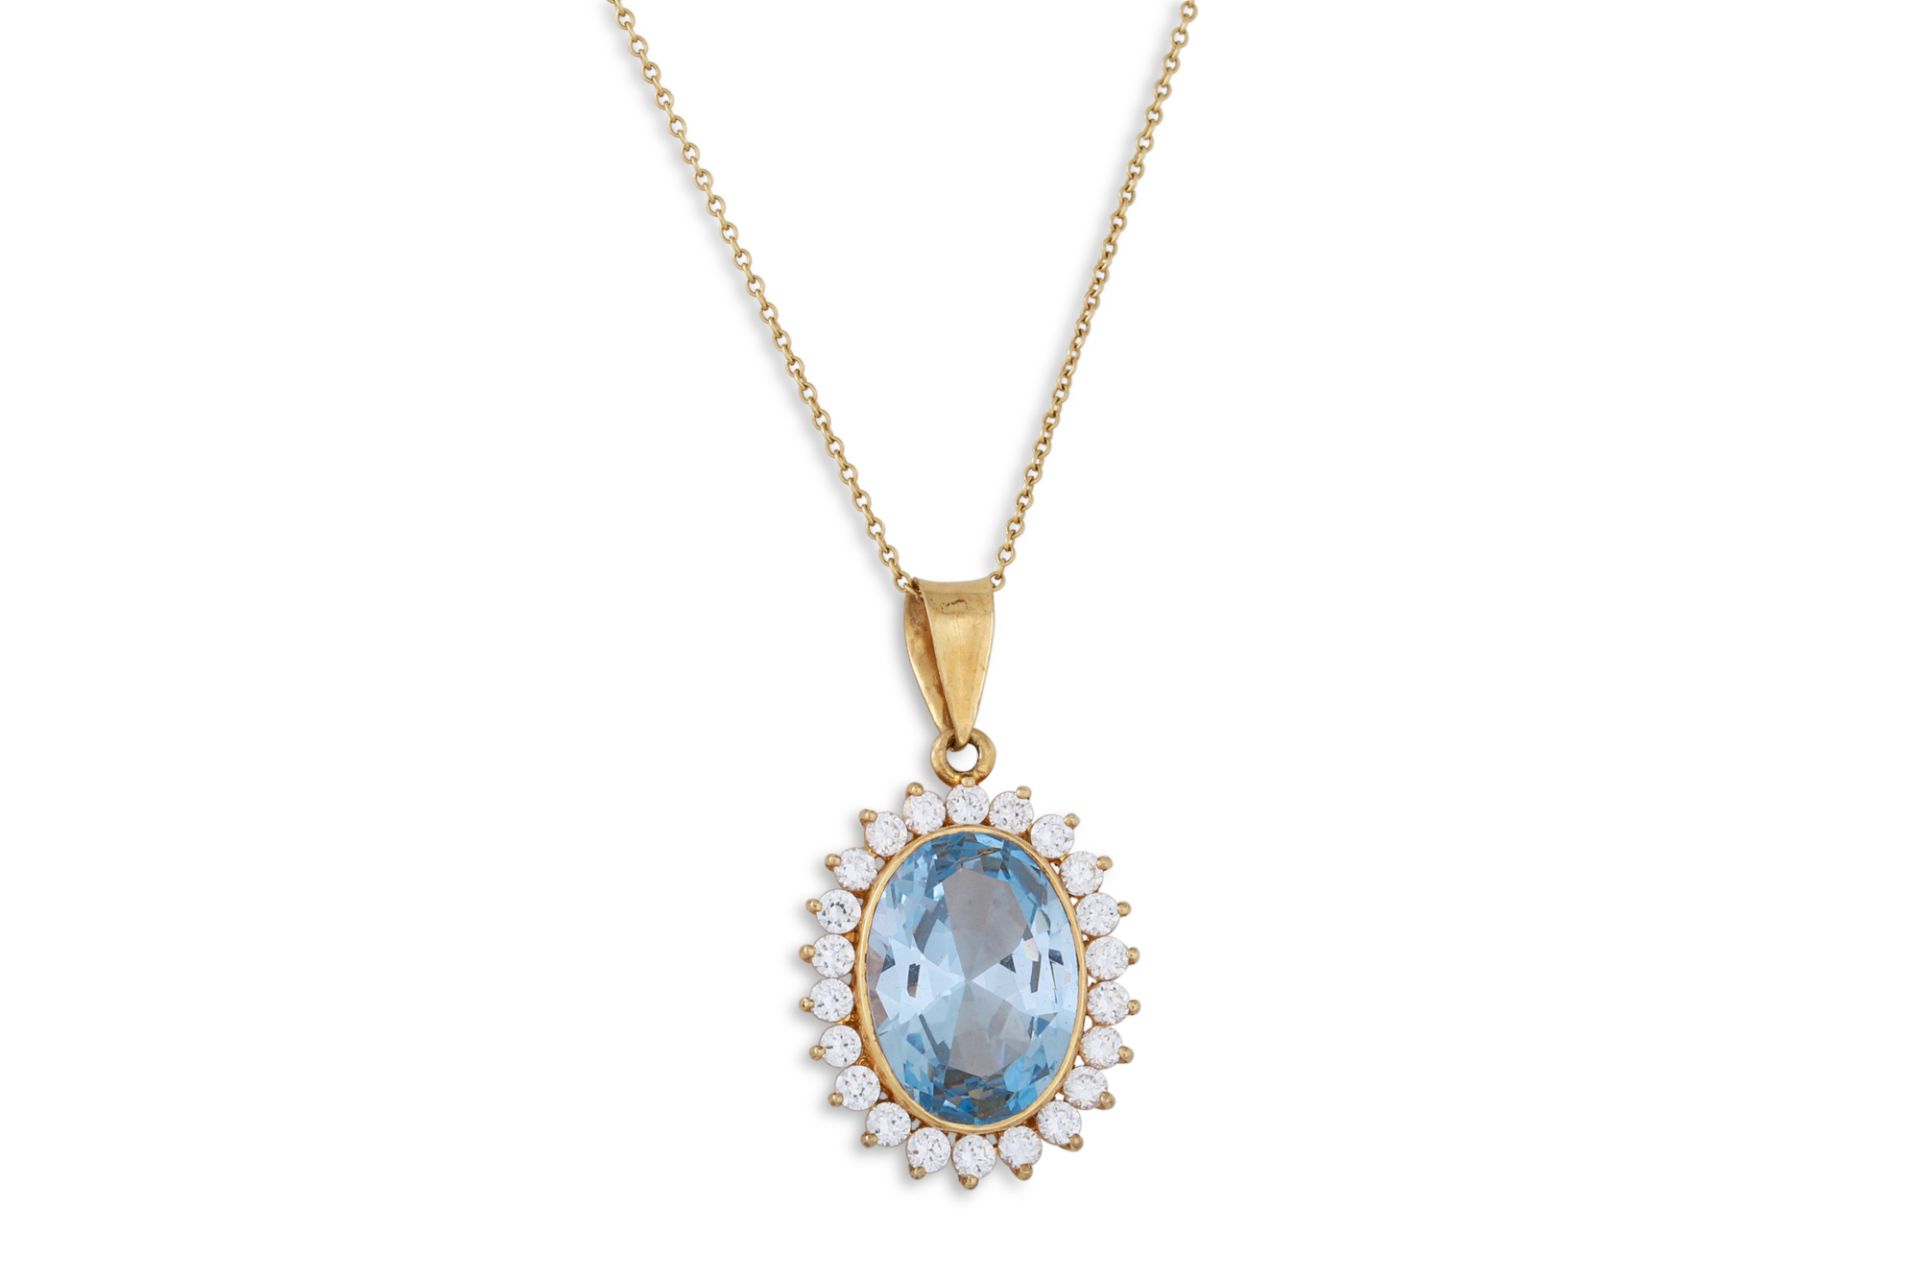 A CLUSTER PENDANT, suspended from an Elsa Peretti for Tiffany & Co 18ct gold chain